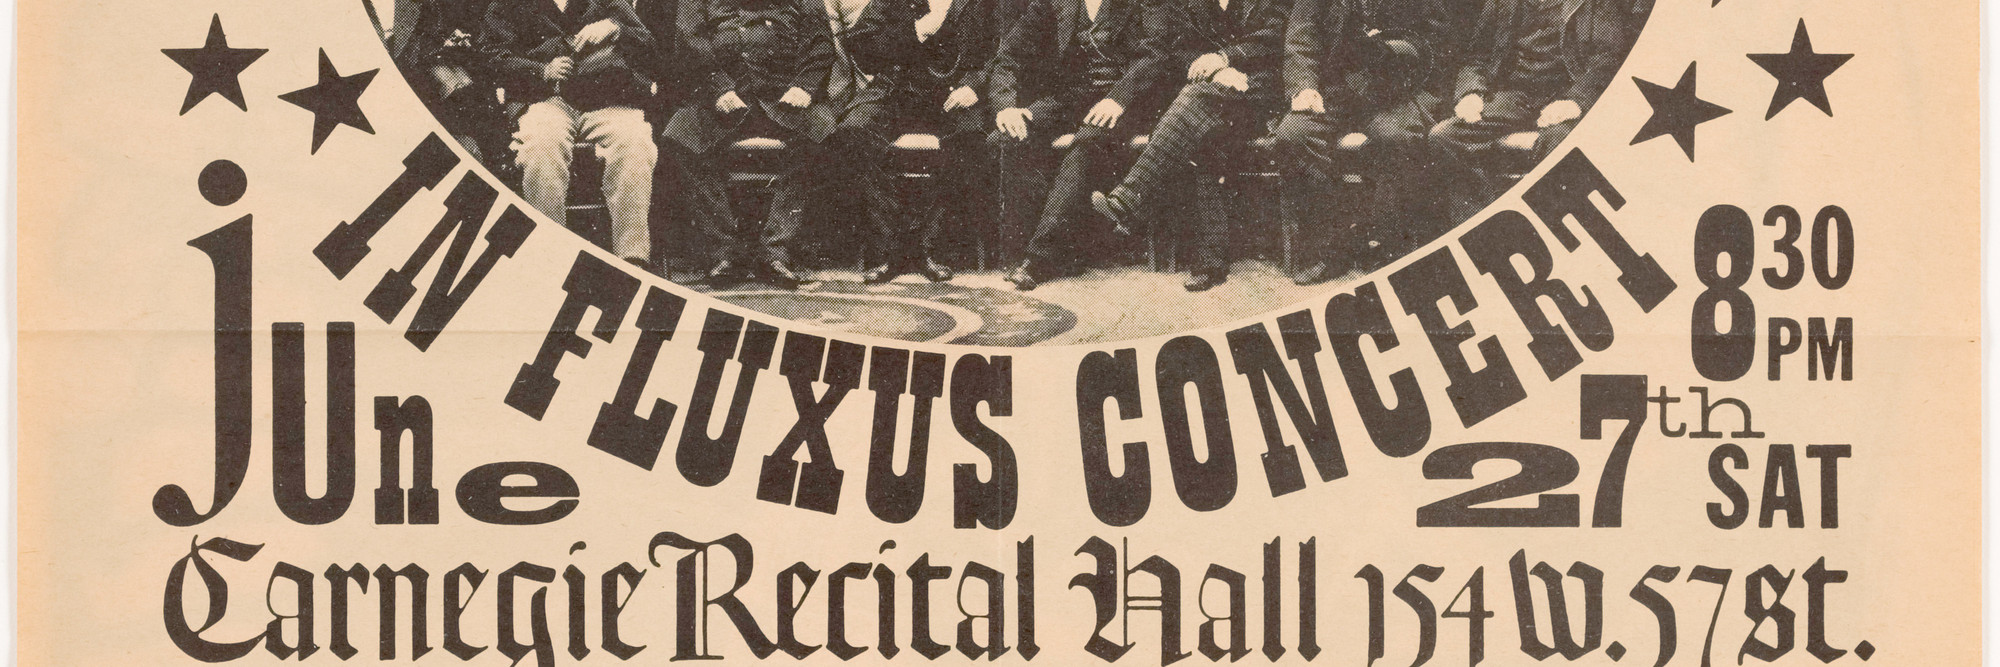 George Maciunas. Poster for Fluxus Symphony Orchestra in Fluxus Concert, Carnegie Recital Hall, New York, June 27, 1964. 1964. Double-sided offset lithograph. The Gilbert and Lila Silverman Fluxus Collection Gift. Photo: Peter Butler